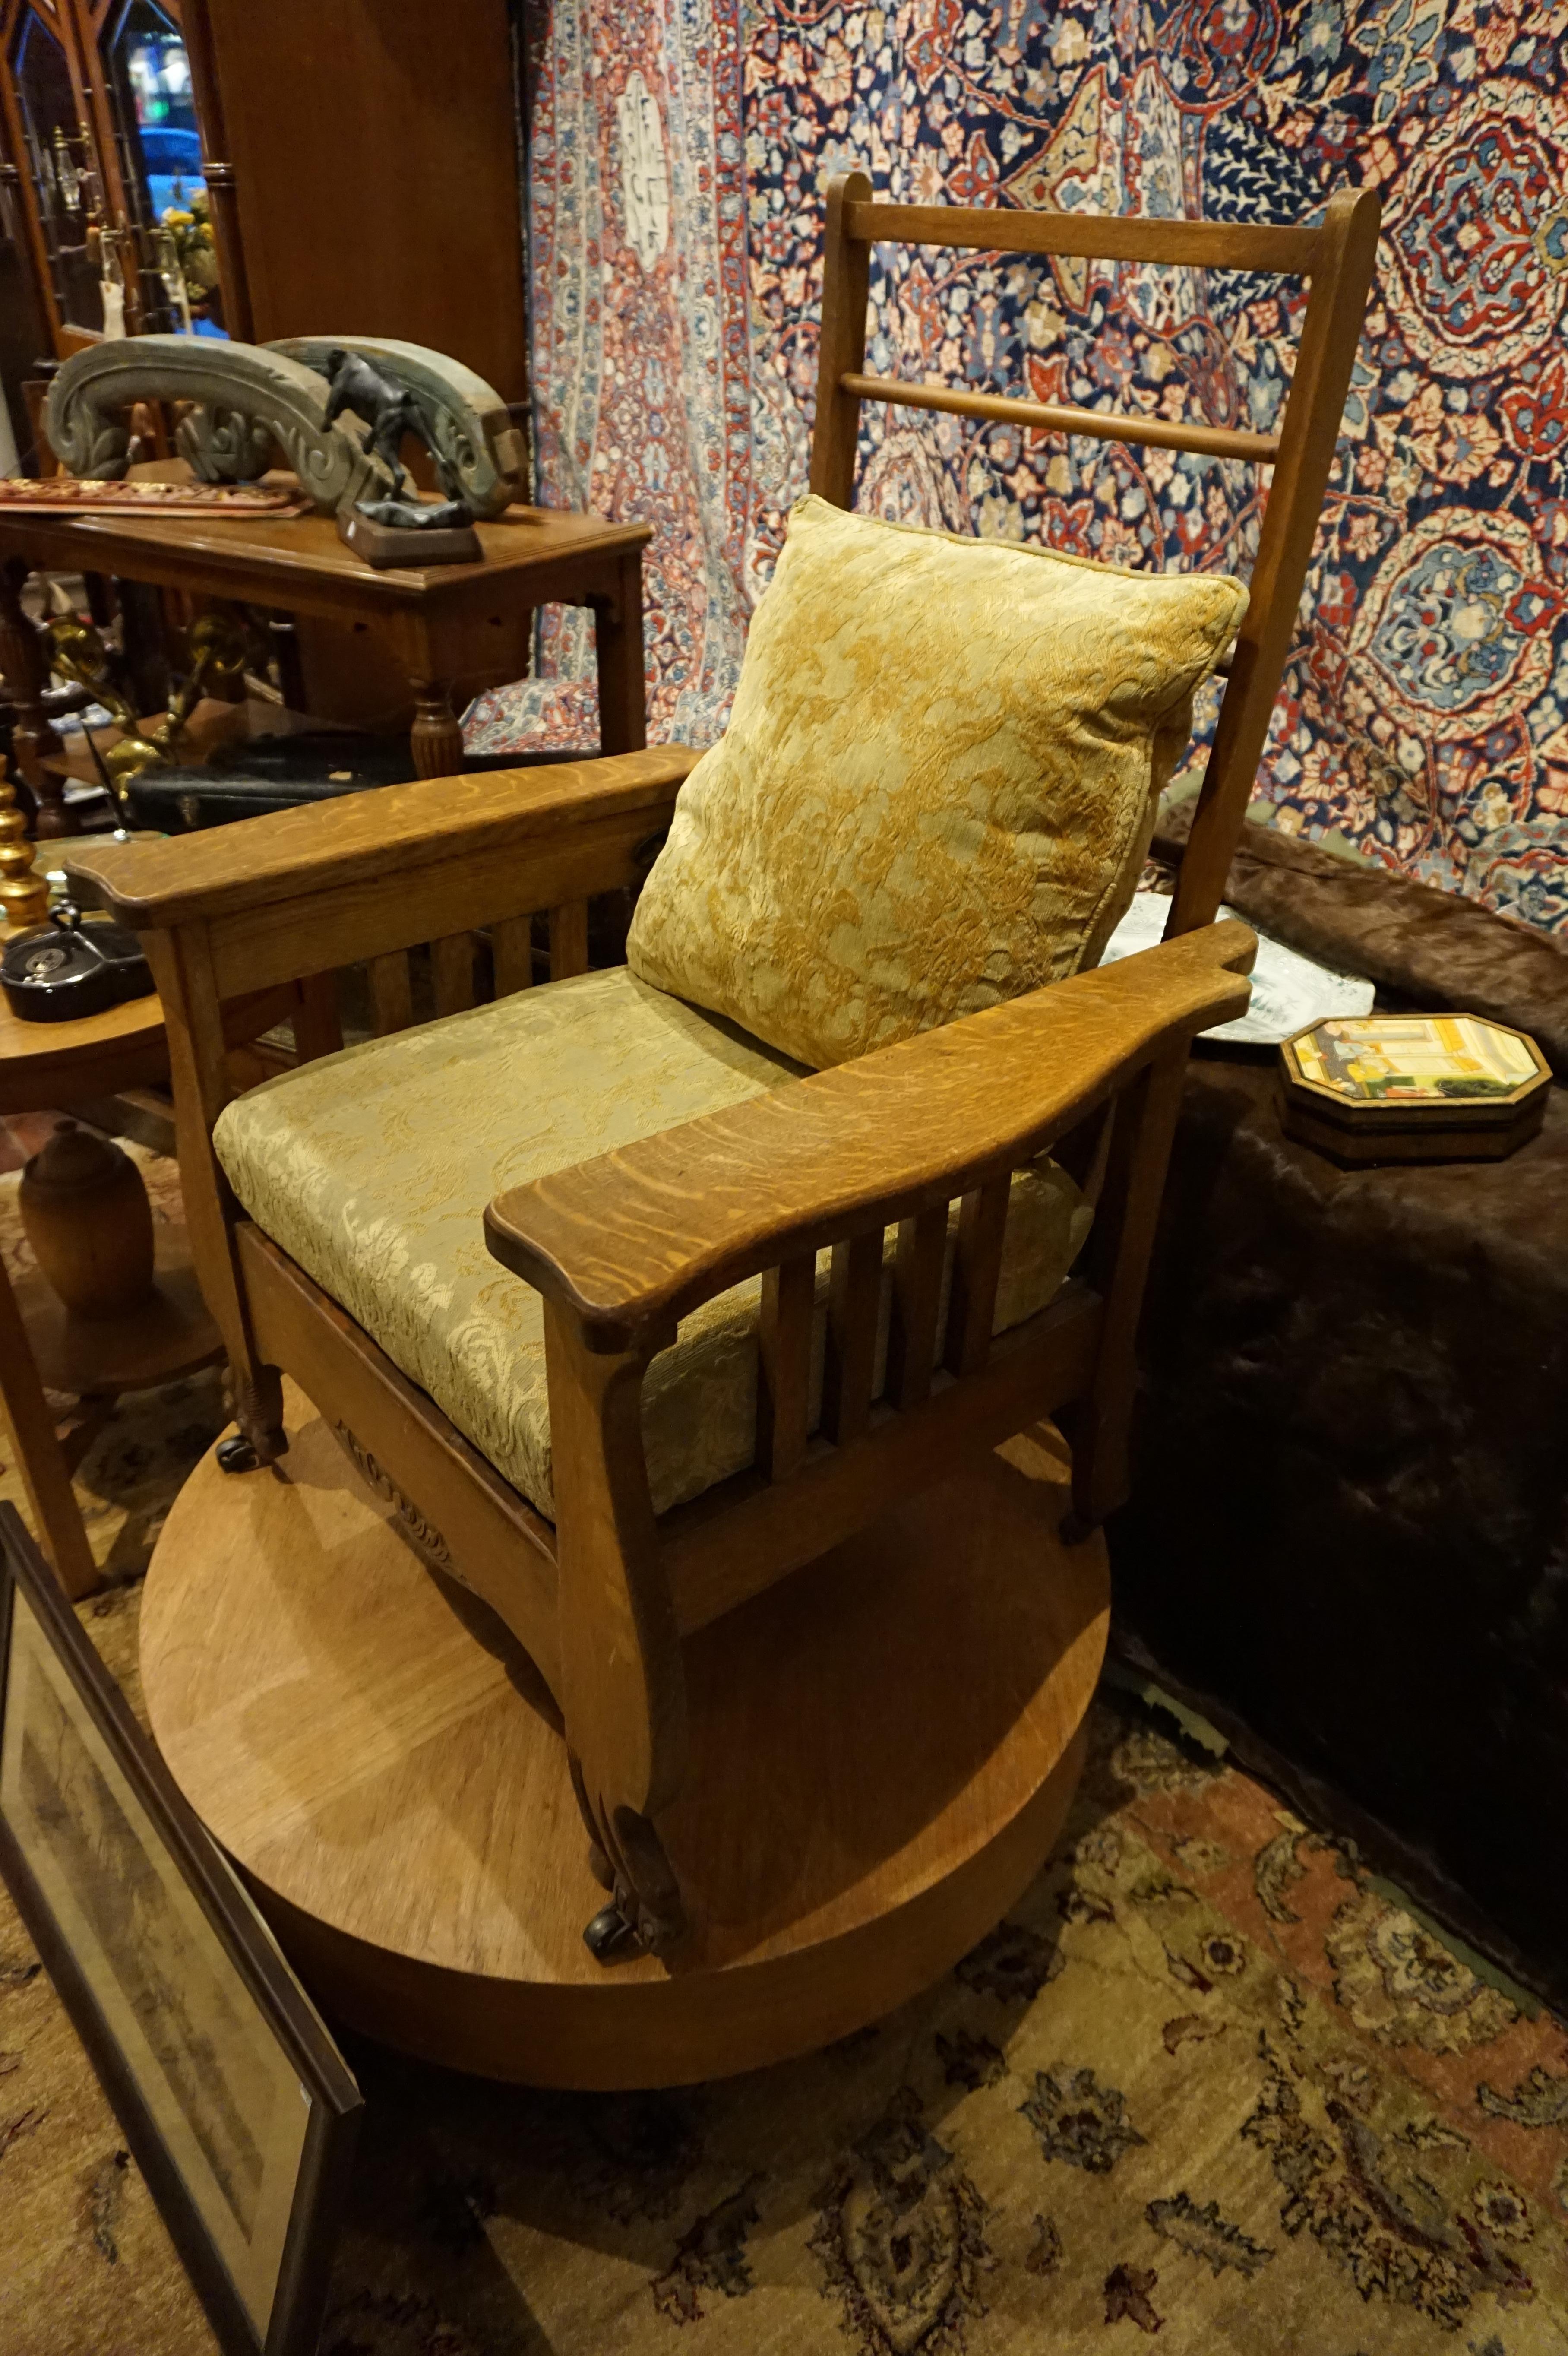 Canadiana Morris chair with label. Solid oak construction. Carved paws on feet and casters. Adjustable back mechanism,

circa 1900-1910.